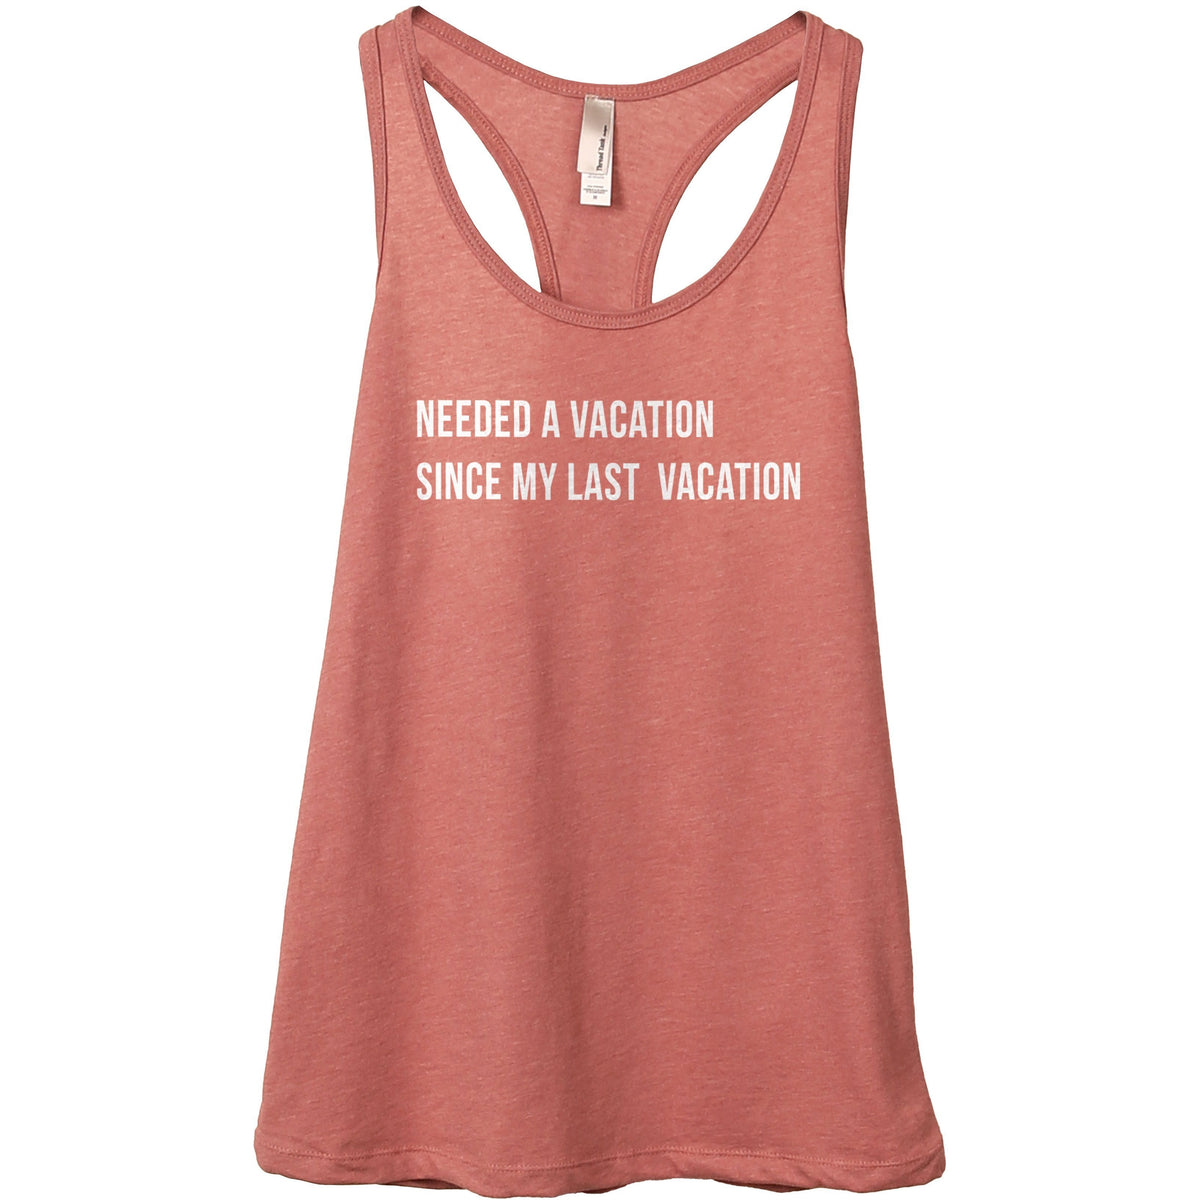 Needed A Vacation Since My Last Vacation Women's Flowy Racerback ...